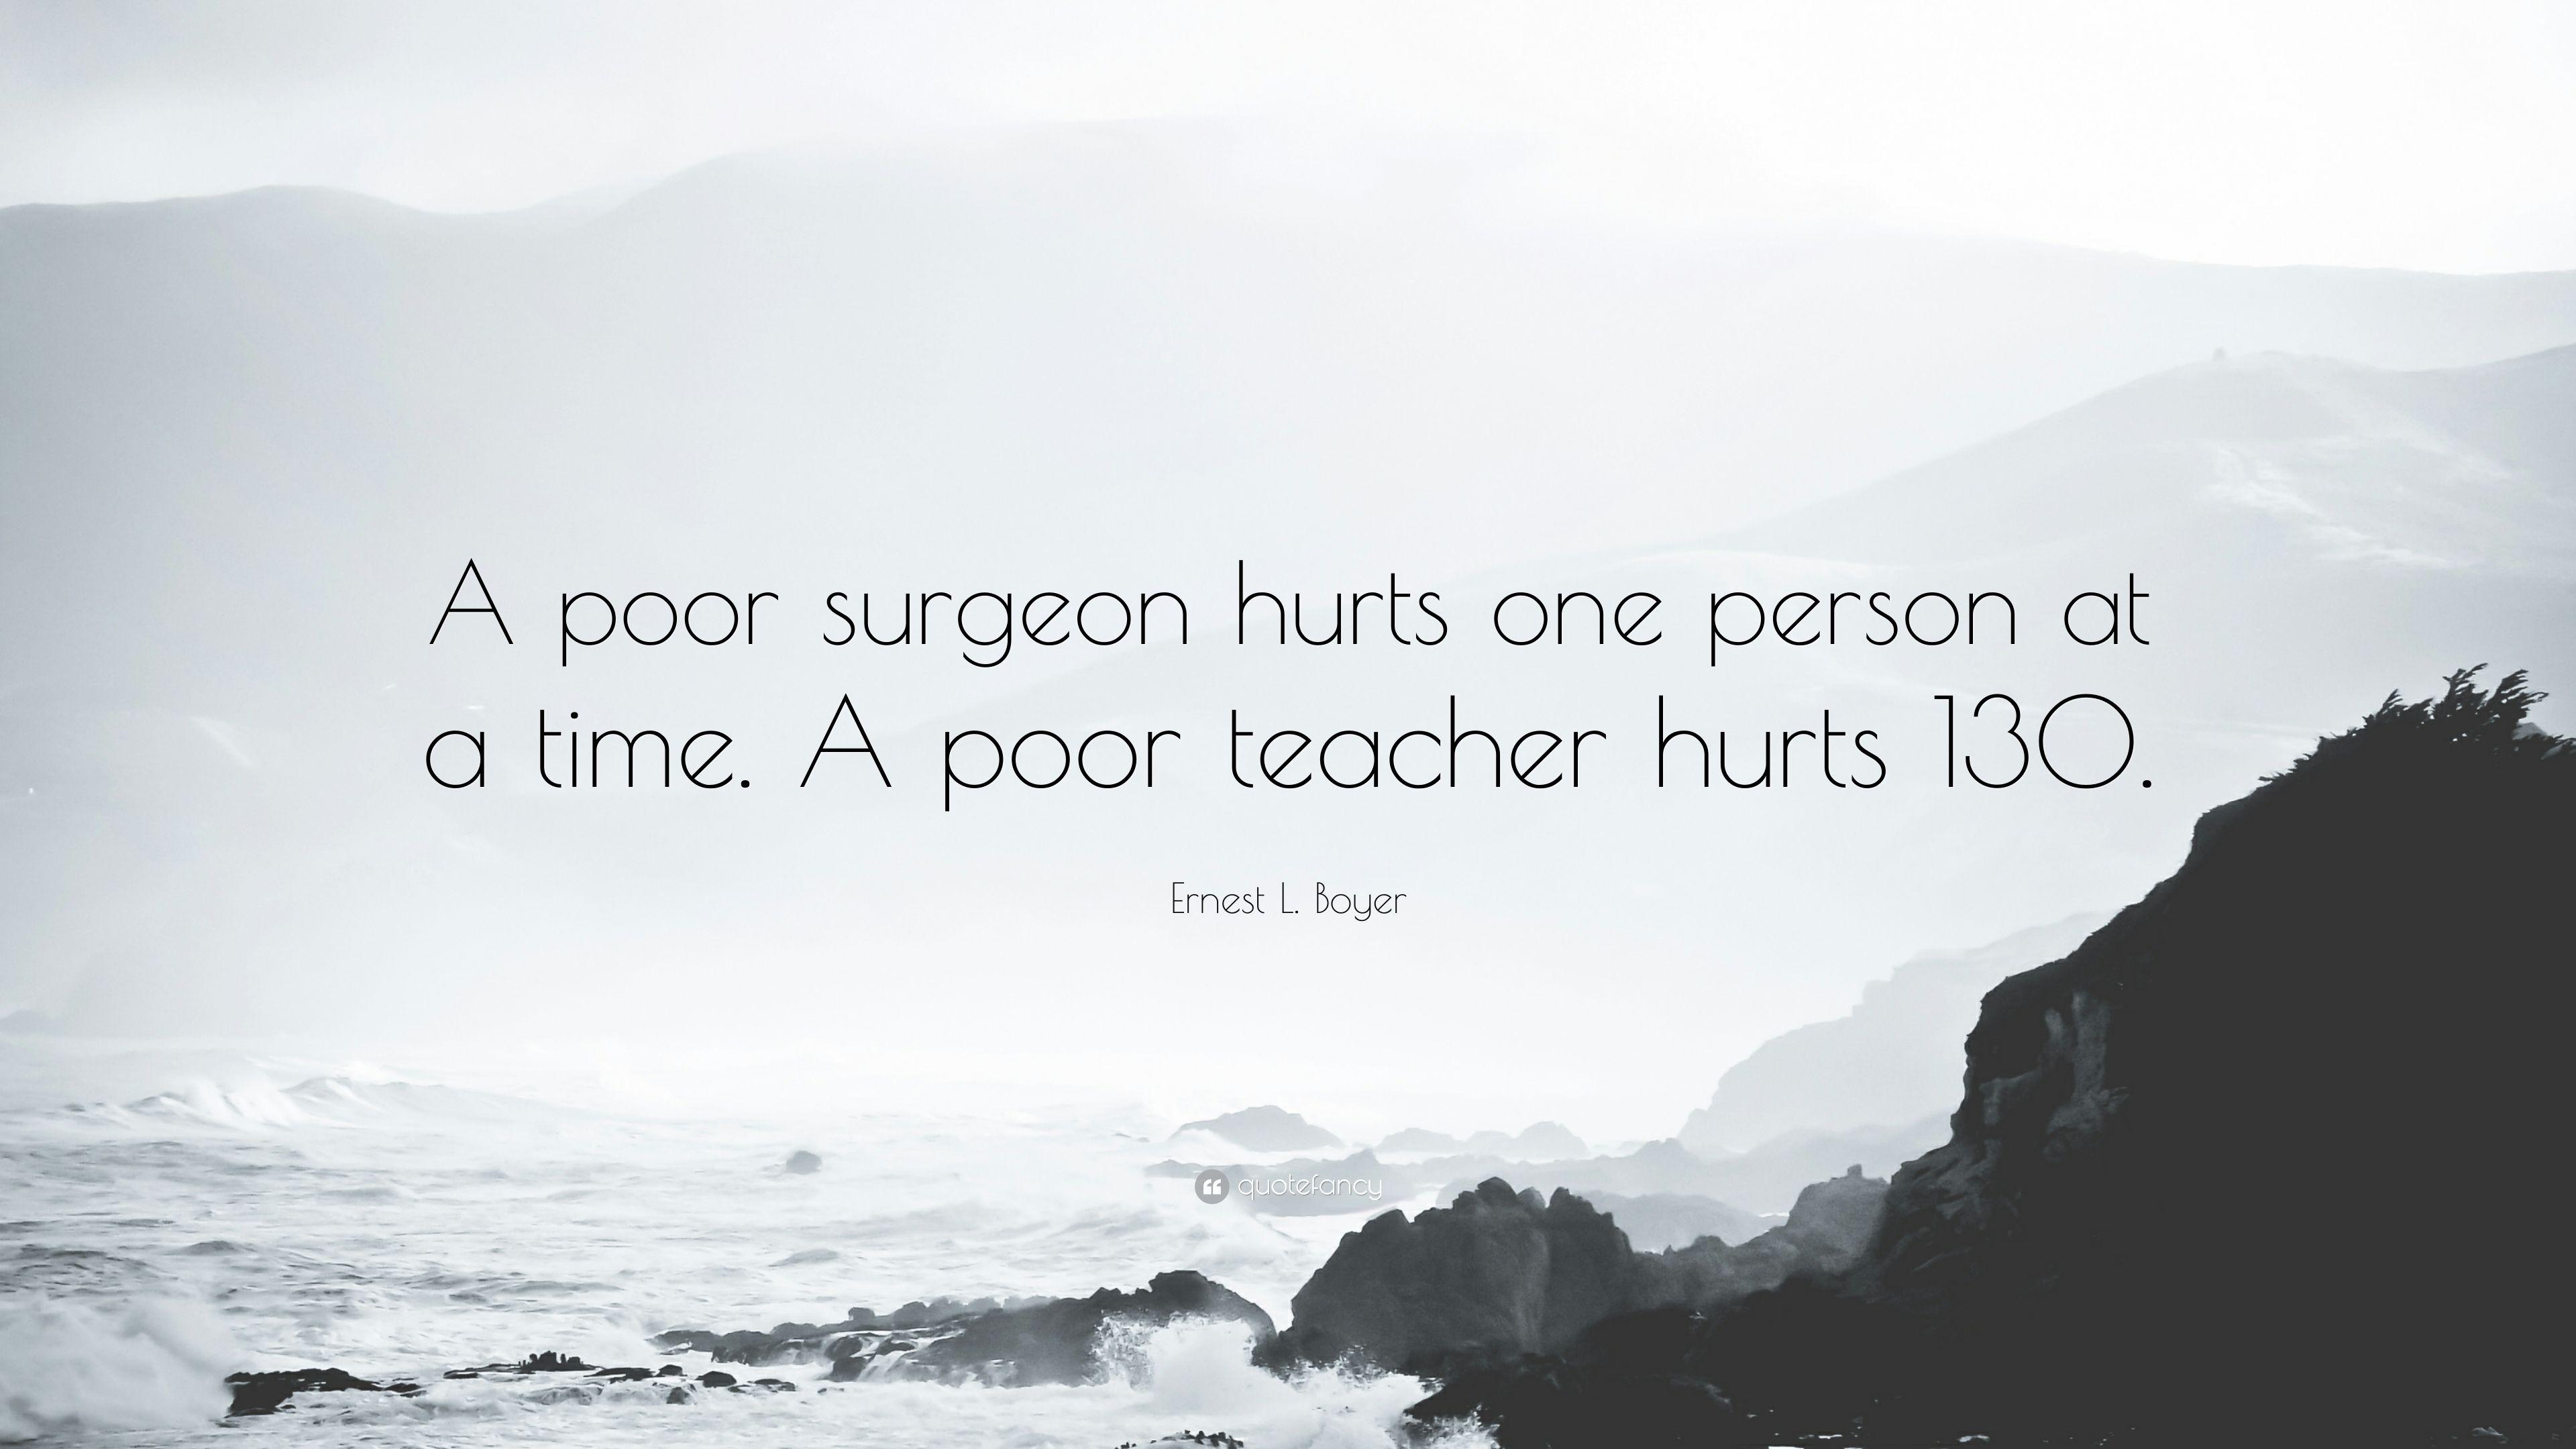 Ernest L. Boyer Quote: “A poor surgeon hurts one person at a time